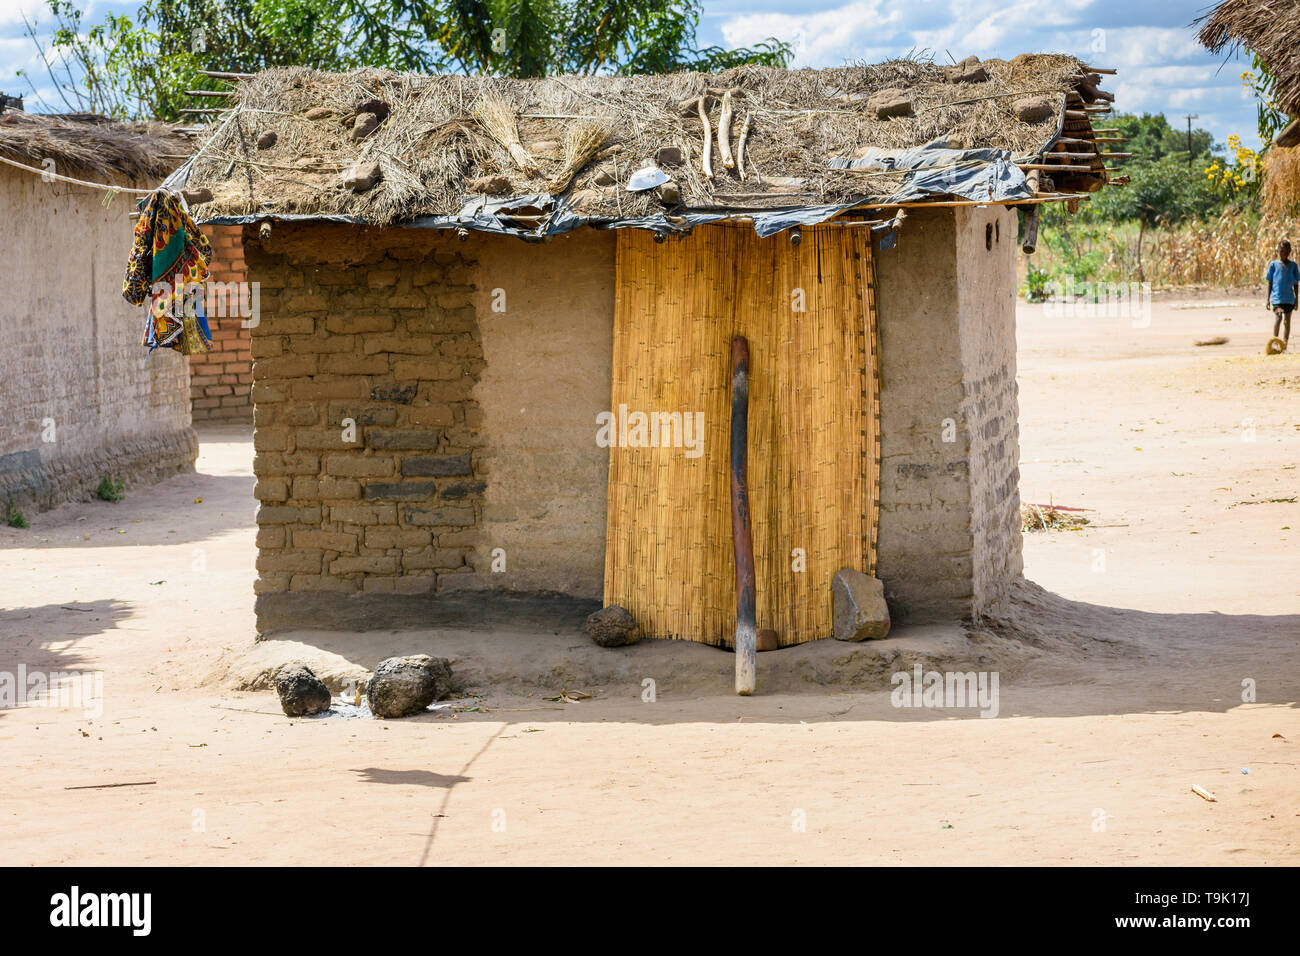 a small mud hut with a grass roof and a door made from a reed mat in a village in Malawi Stock Photo